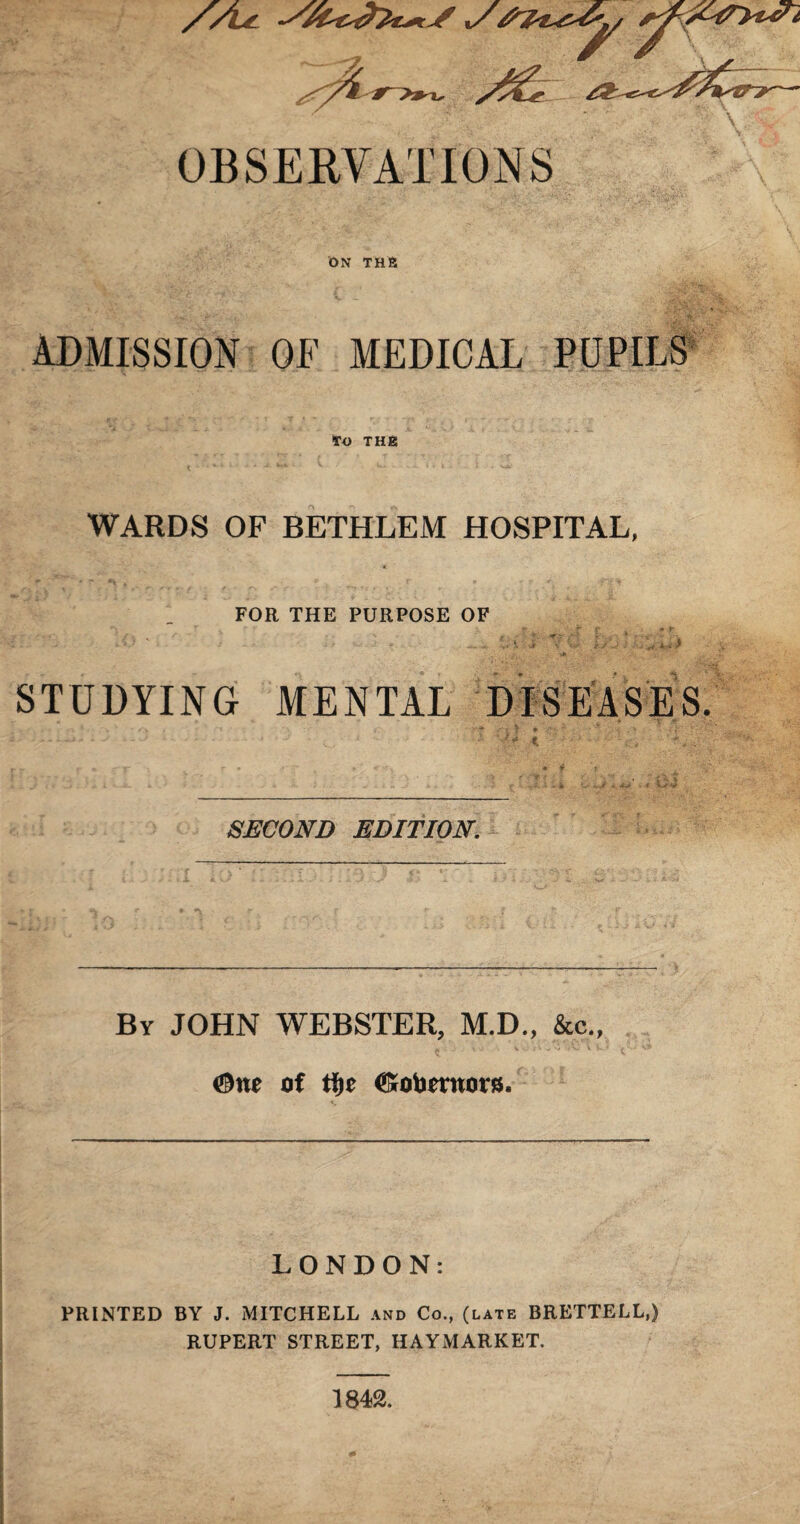 ON THE ADMISSION OF MEDICAL PUPILS TO THE WARDS OF BETHLEM HOSPITAL, FOR THE PURPOSE OF ■ ■ ' .... . \ i ' ' . „ *.. > STUDYING MENTAL DISEASES. SECOND EDITION. By JOHN WEBSTER, M.D., &c., #ne of tfyt <S*obmtor8. LONDON: PRINTED BY J. MITCHELL and Co., (late BRETTELL.) RUPERT STREET, HAYMARKET. 1842.